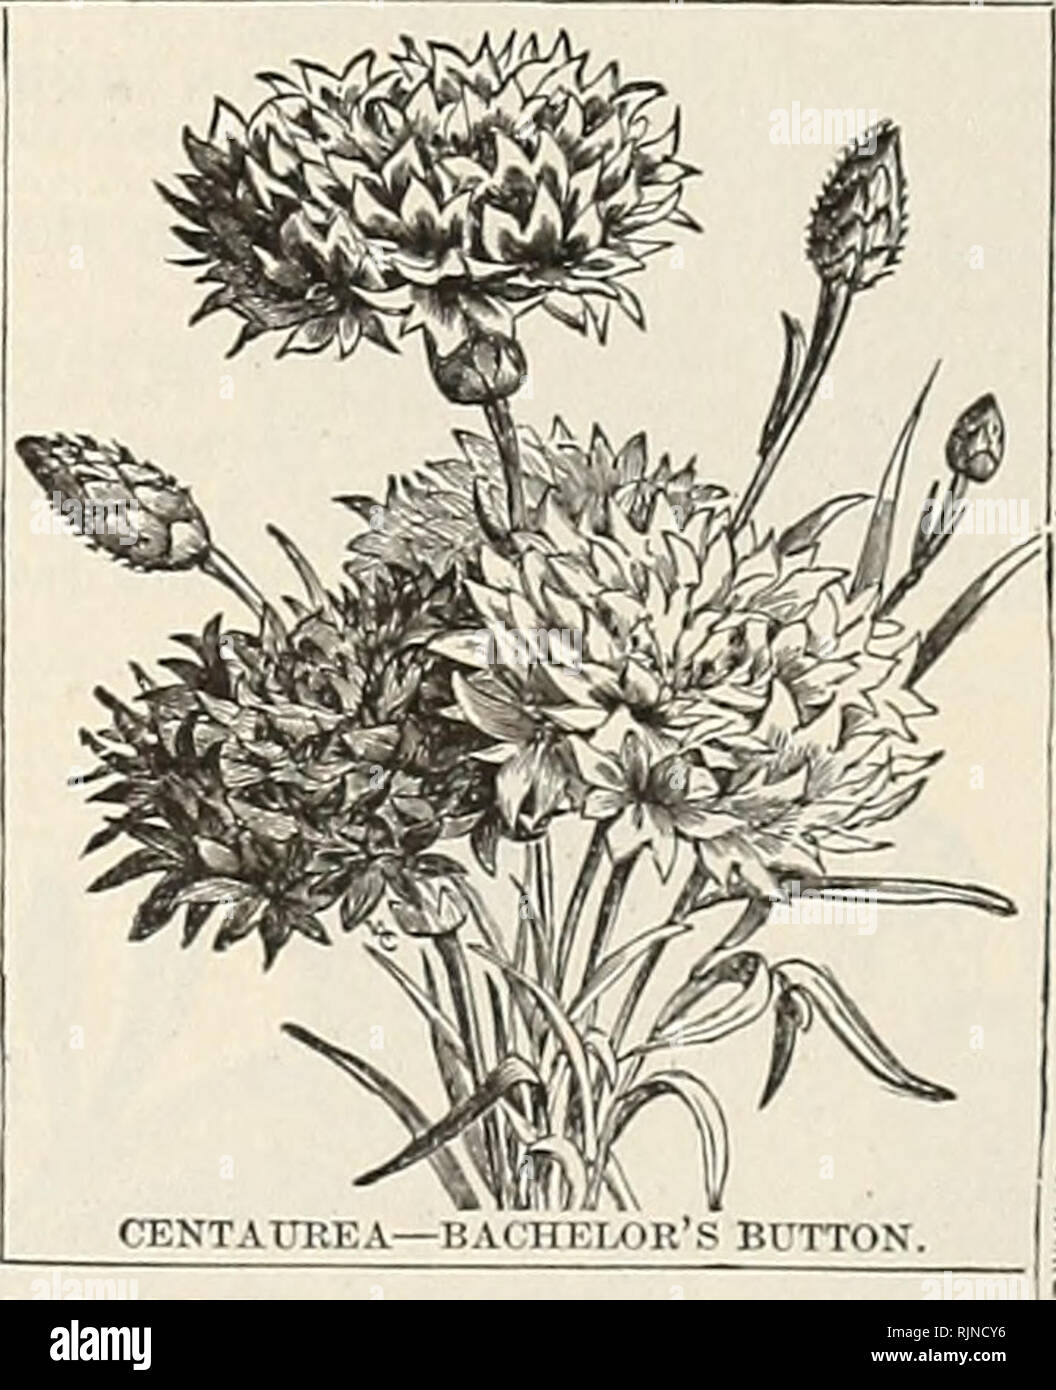 . A. W. Livingston's Sons seed annual : &quot;true blue.&quot;. Seeds Catalogs; Seed industry and trade Ohio Columbus Catalogs; Vegetables Ohio Columbus Catalogs; Fruit Ohio Columbus Catalogs; Flowers Ohio Columbus Catalogs. CENTAUREA CYANUS, OR BACHELOR'S BUTTONS. (Corn Flower, Blue Bottle, Ragged Sailor, etc.)—Very old favorite hardy annual; flowers freely in almost any situation; for cut flowers they are largely tised both in Europe and this country, a little Dunch of the blue Com Flower being a favorite bou- tonniere. CYANUS—Pwre white; very fine CYANUS—&quot;i??H€r' or Emperor Flower. Fin Stock Photo